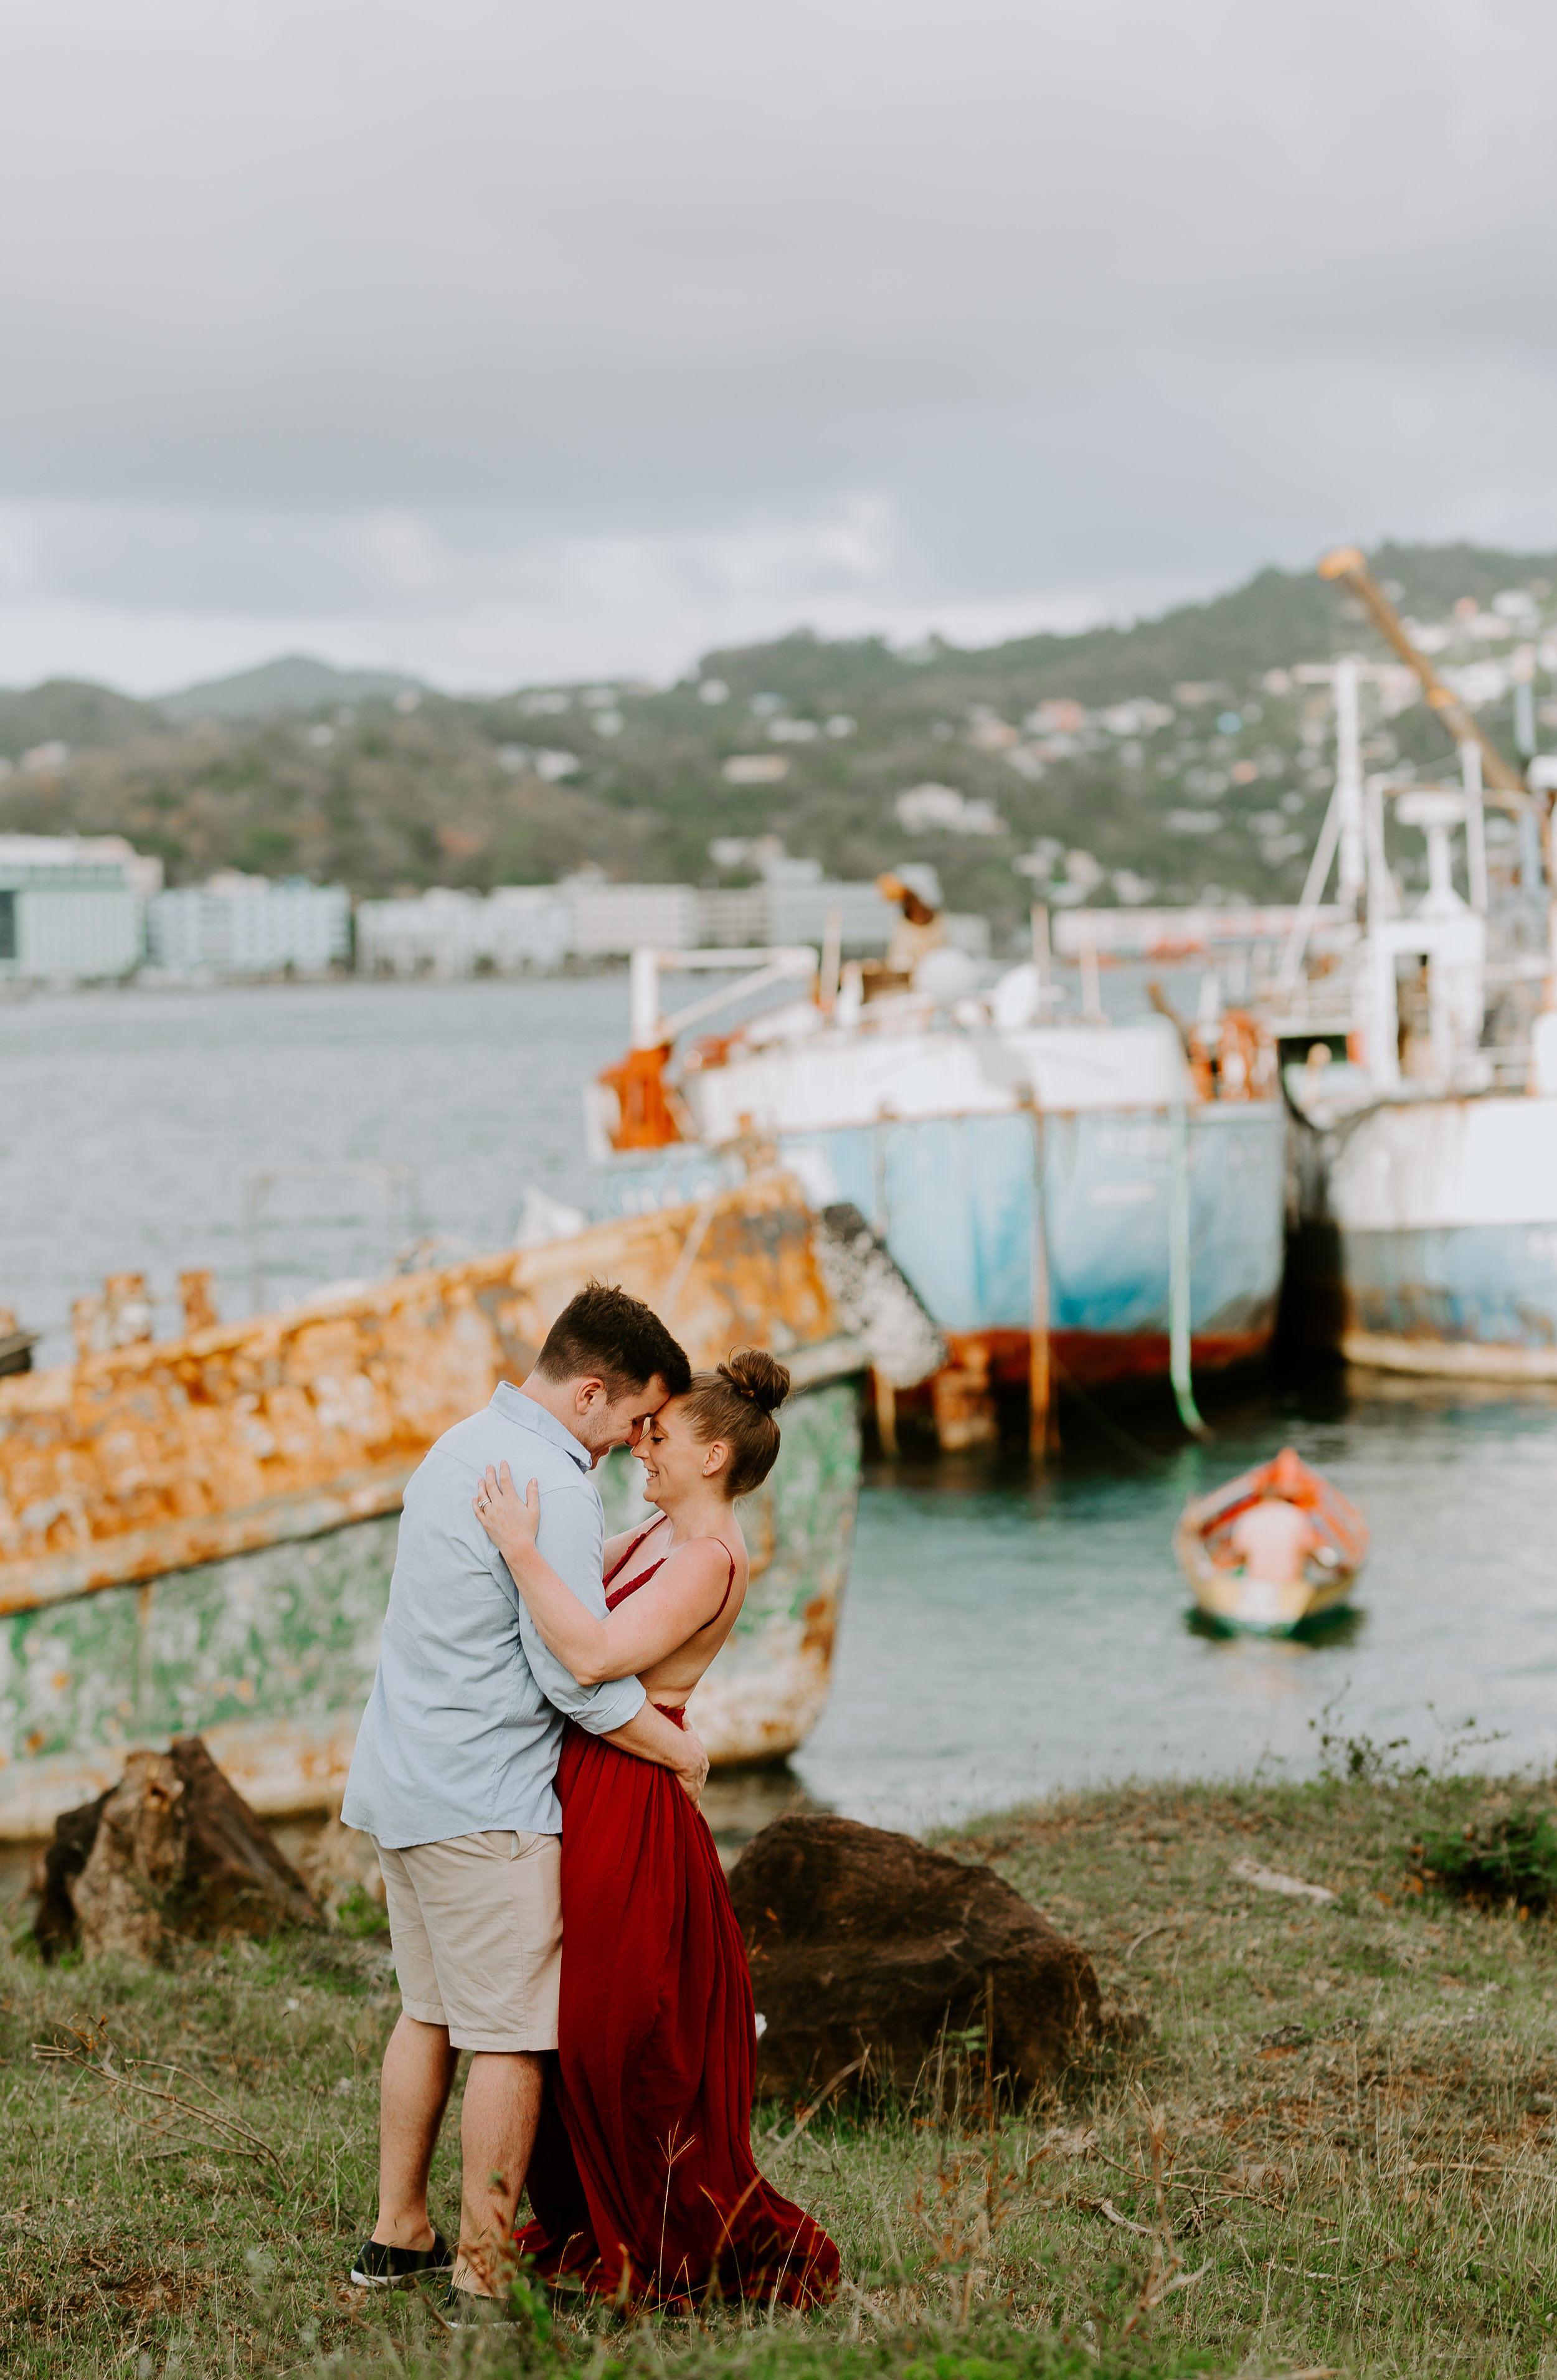 nicole-daacke-photography-st-lucia-destination-wedding-photographer-day-after-session-castries-sandals-resort-adventure-island-engagement-soufriere-piton-adventure-session-photos-photographer-28.jpg